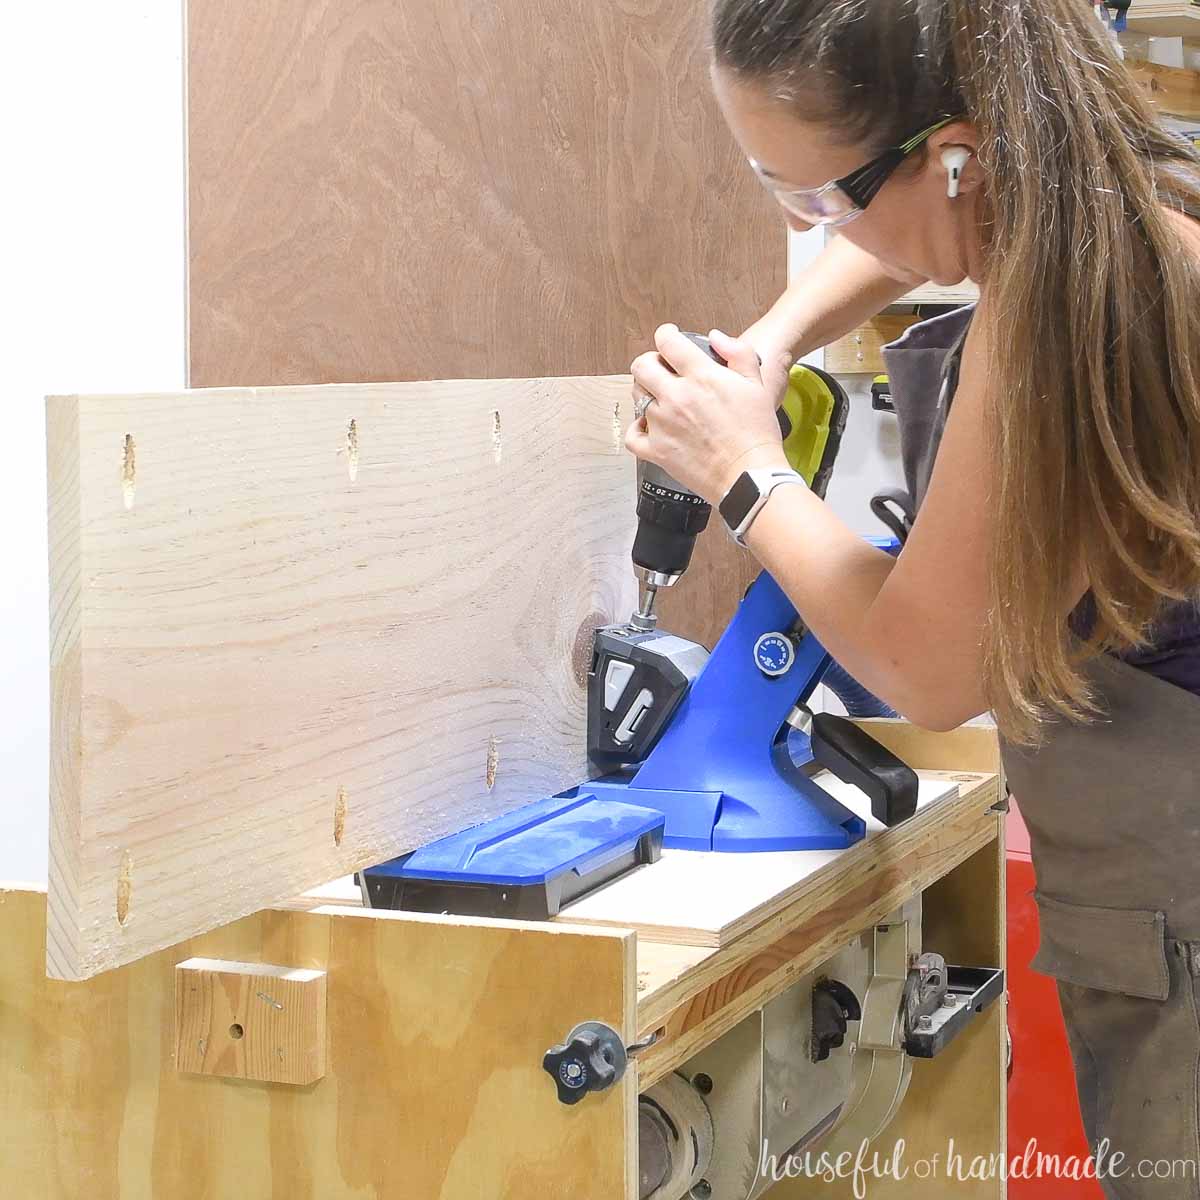 Drilling pocket hole screws in the sides of the boards with the Kreg 720Pro.